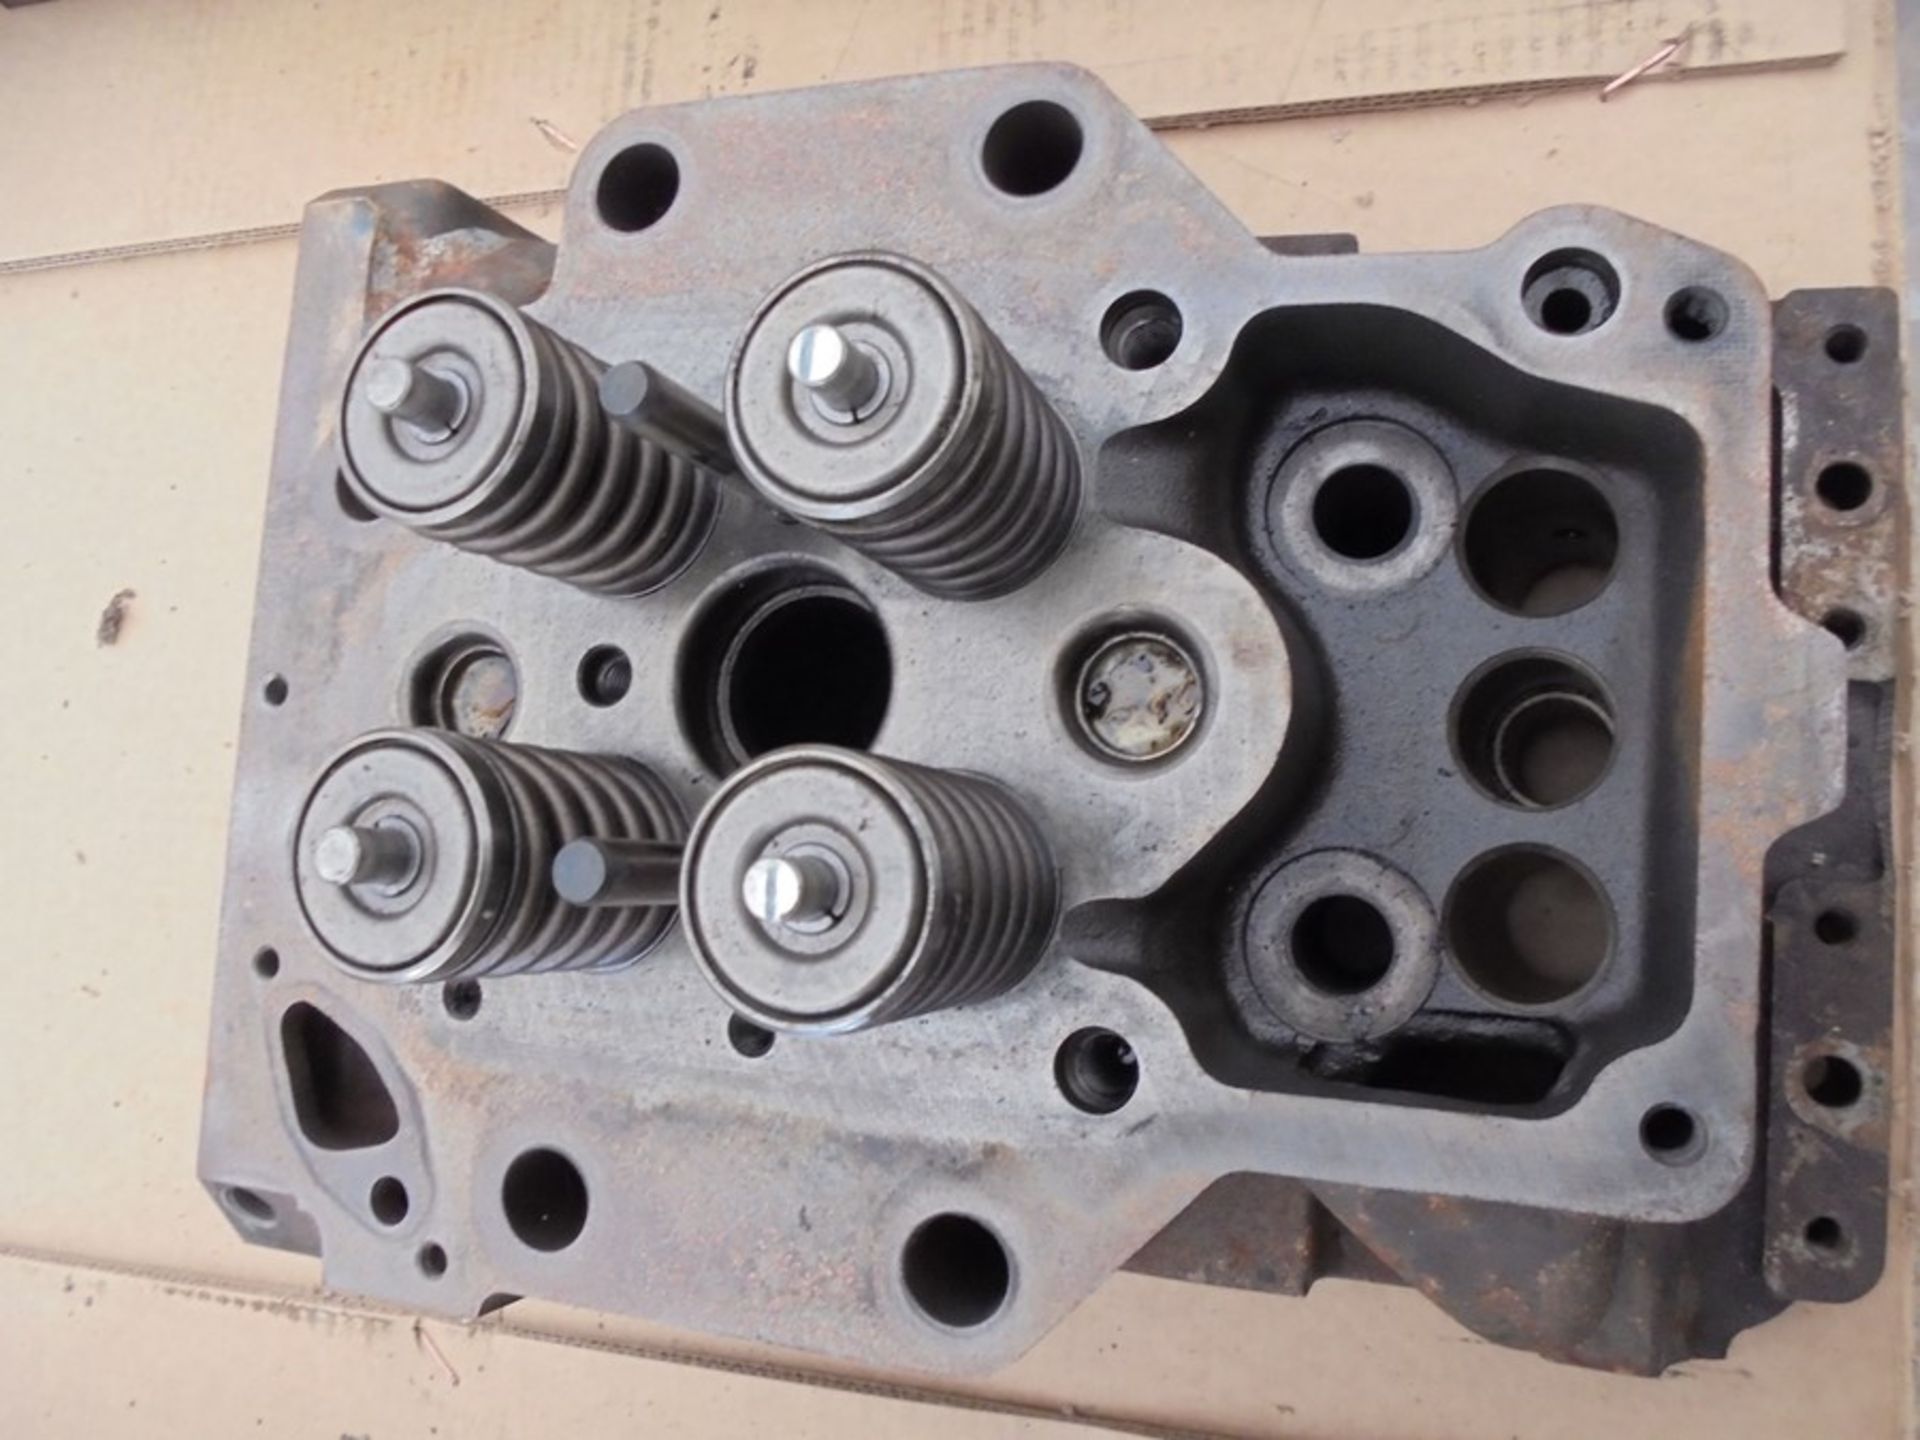 8 x used Caterpillar 3516 cylinder heads, part numbers 205-1560 and 20R3547 (mostly without valves). - Image 4 of 6